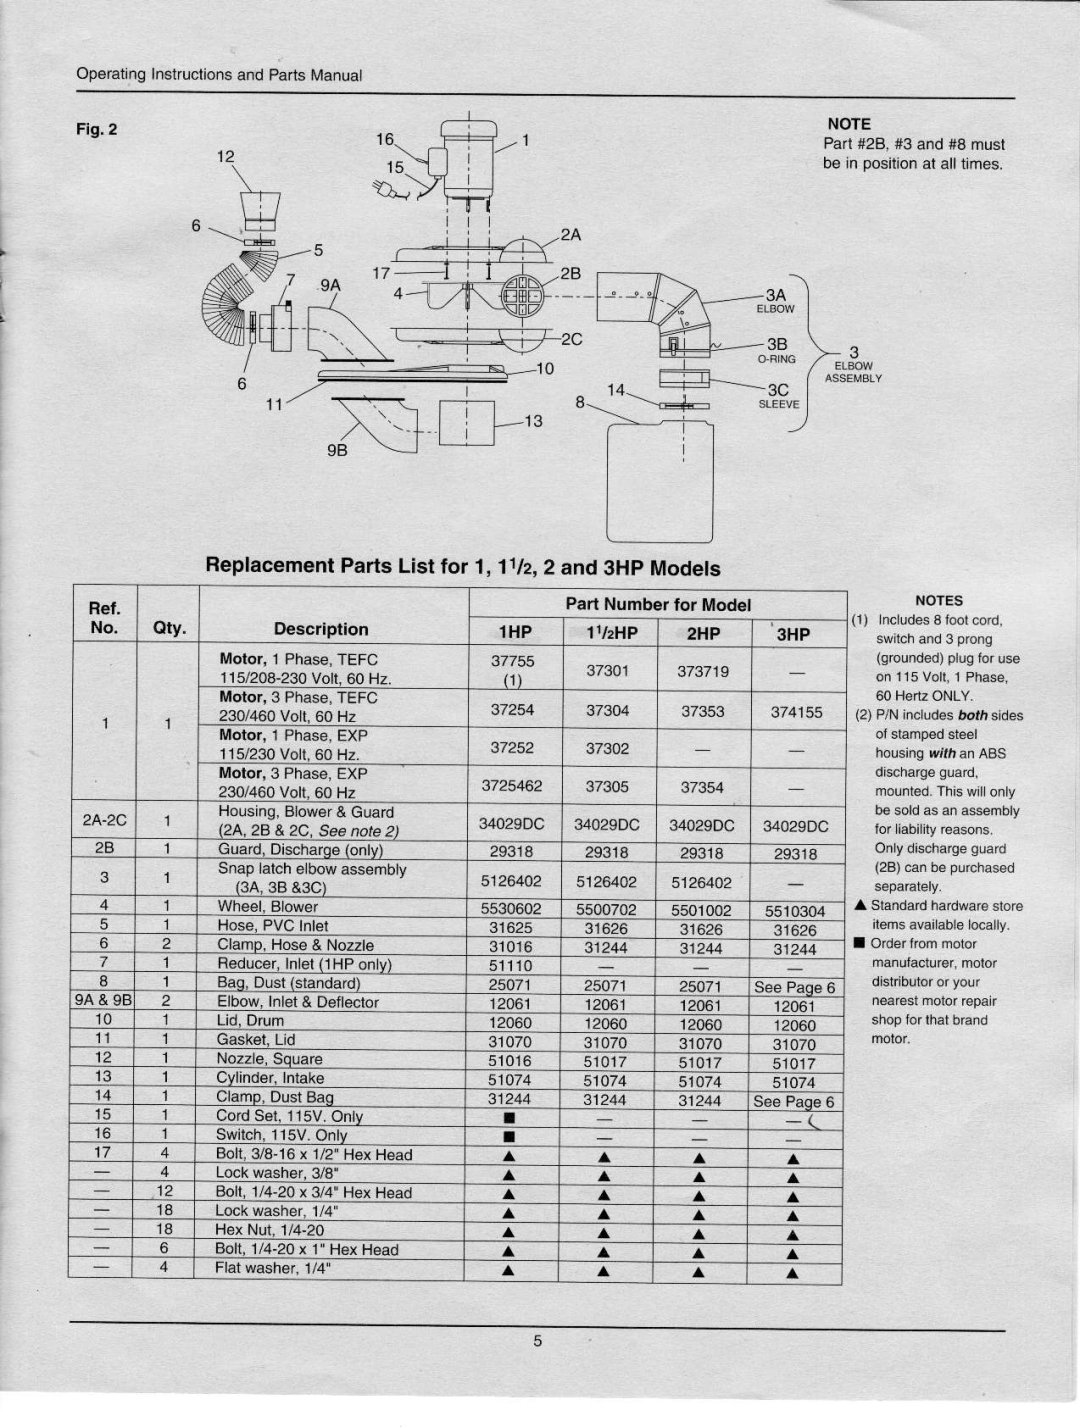 Associated Equipment 3HP, 2HP ll t--\-----f, ReplacementPartsList for 1, 11/2,2 and 3Hp Models, PartNumberfor Model 